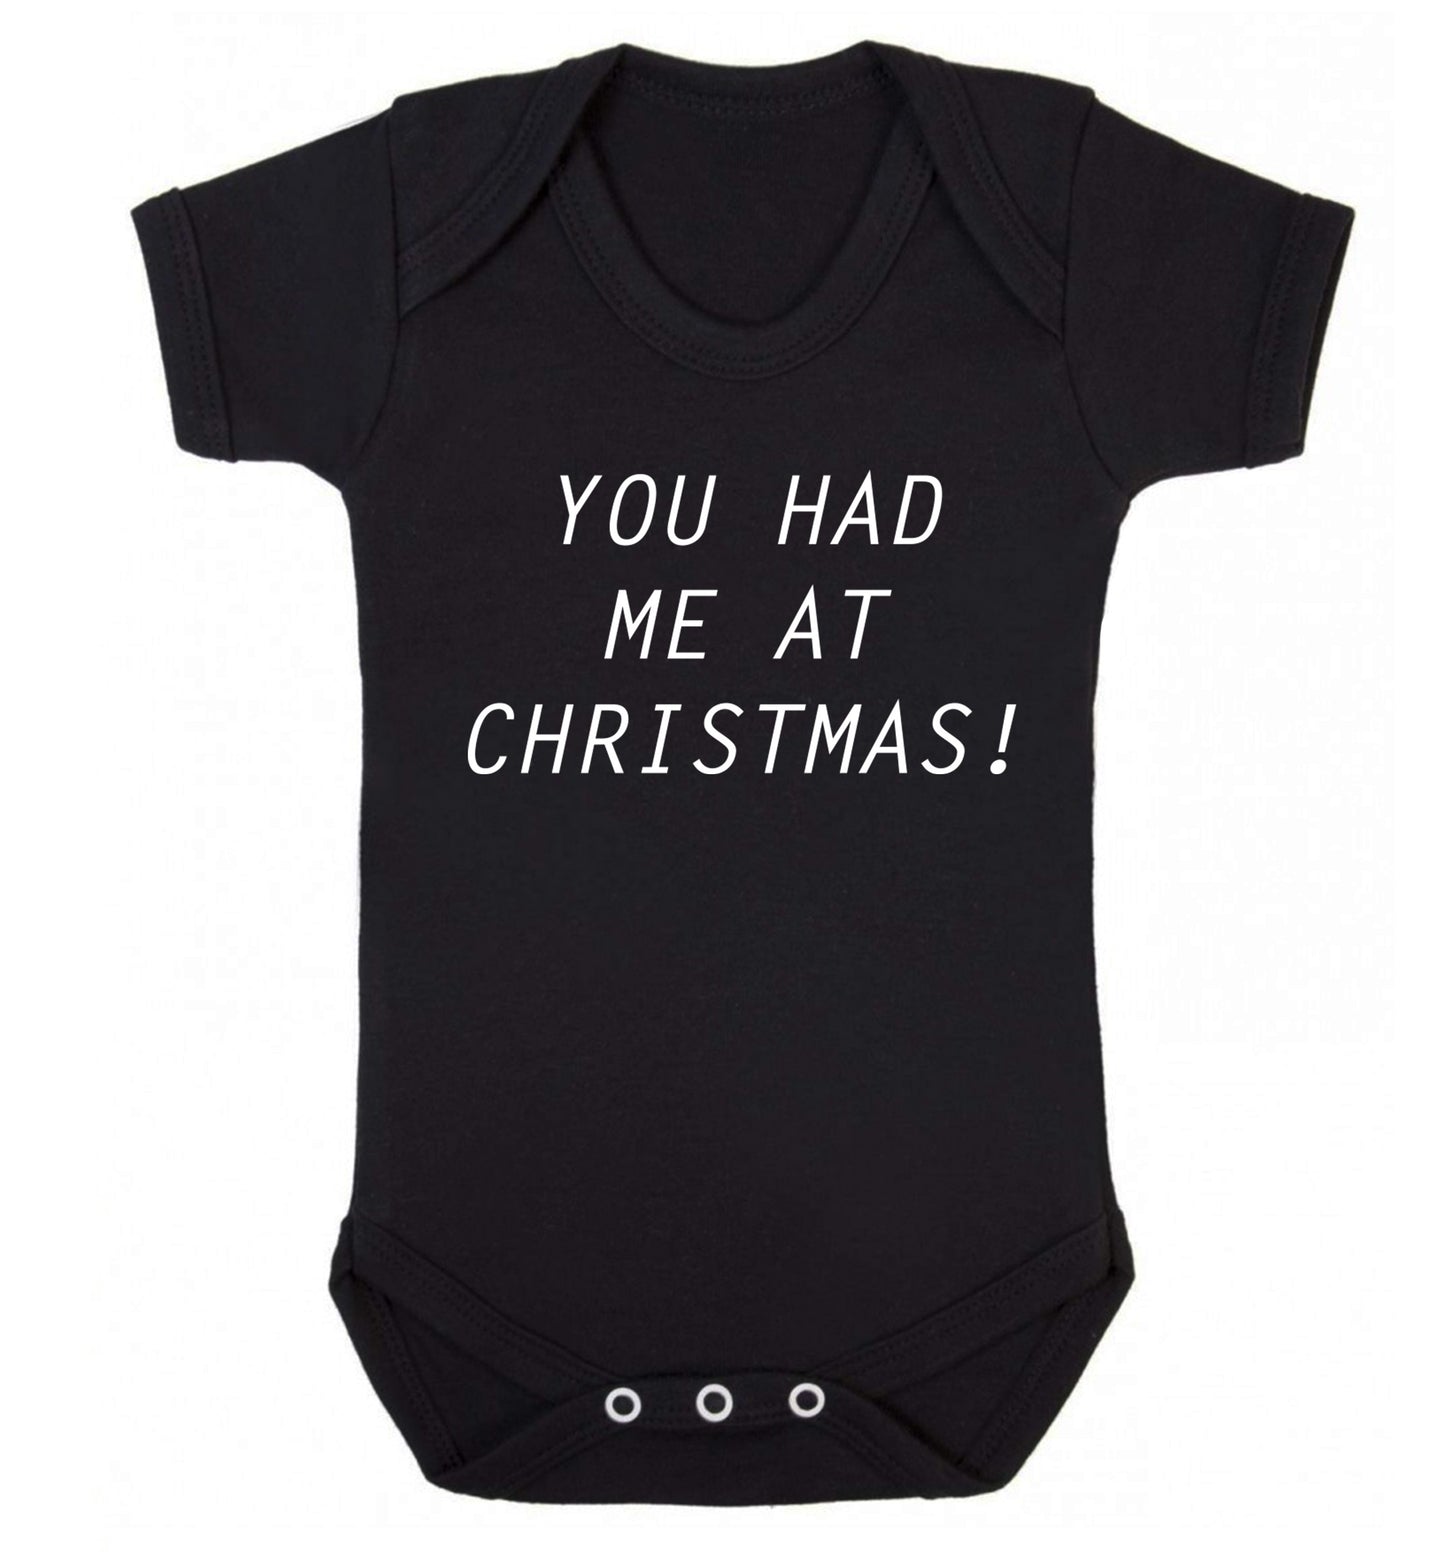 You had me at Christmas Baby Vest black 18-24 months